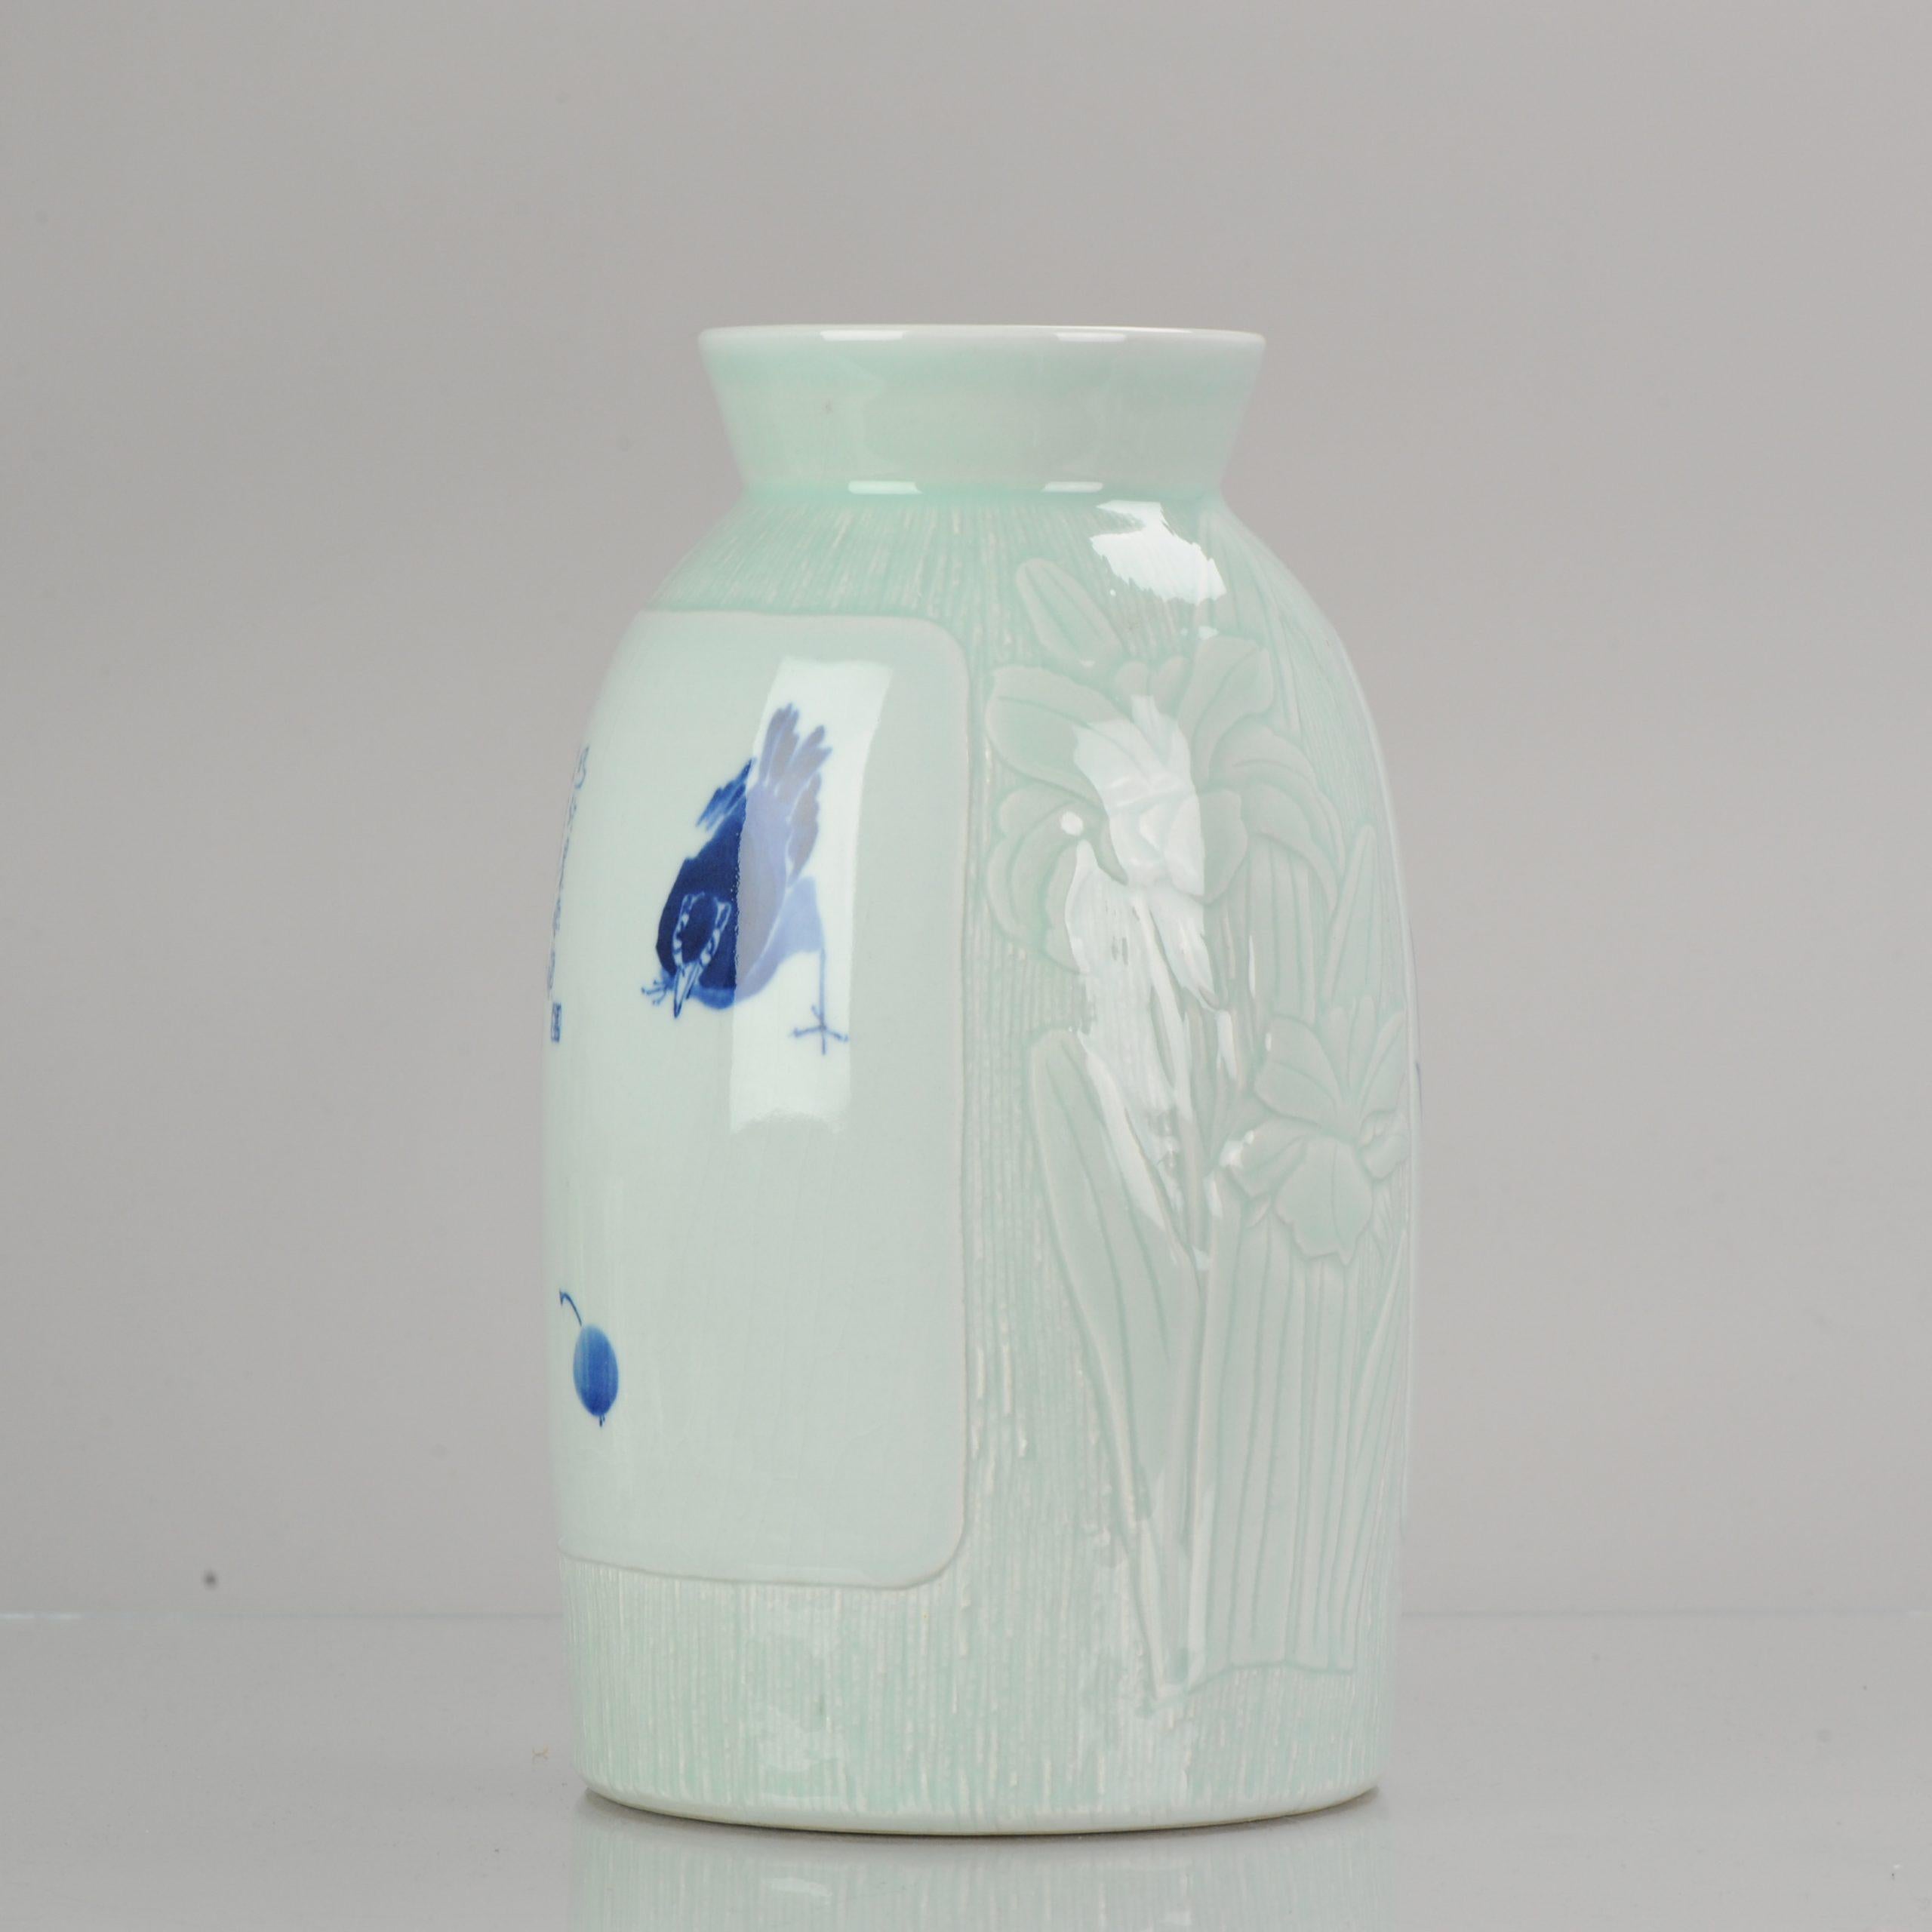 A blue and white porcelain vase, with relief decor of flowers. Dated 2001. Signed Wanglin (1972), Senior Art Artist in Jingdezhen, member of the Jingdezhen Ceramic Art Masters Association. China. H. 31 cm. ???????? “??” ??:2001?